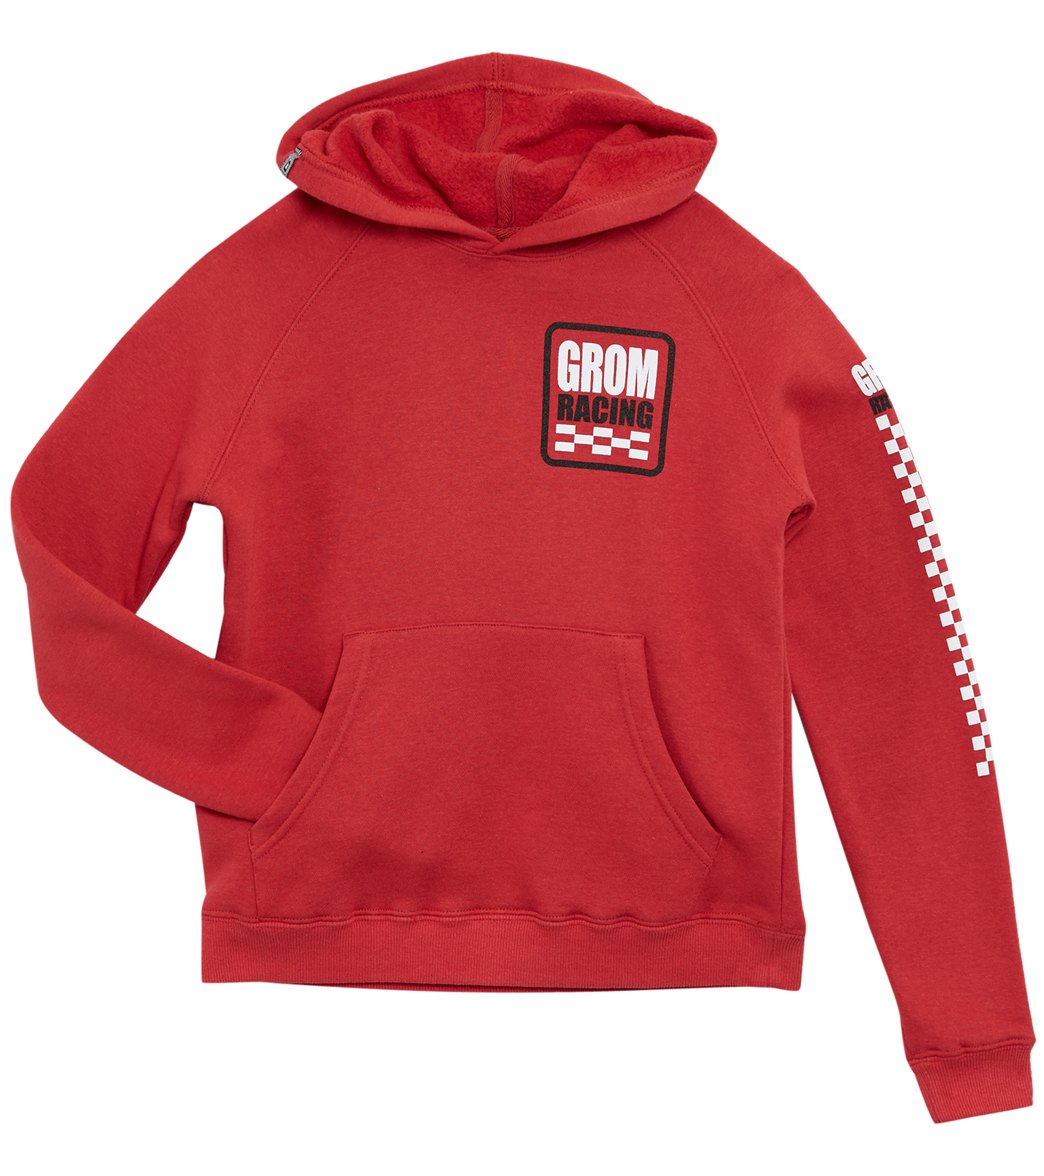 Grom Boys' Racing Pullover Hoodie - Red Large 10/12 Cotton/Polyester - Swimoutlet.com